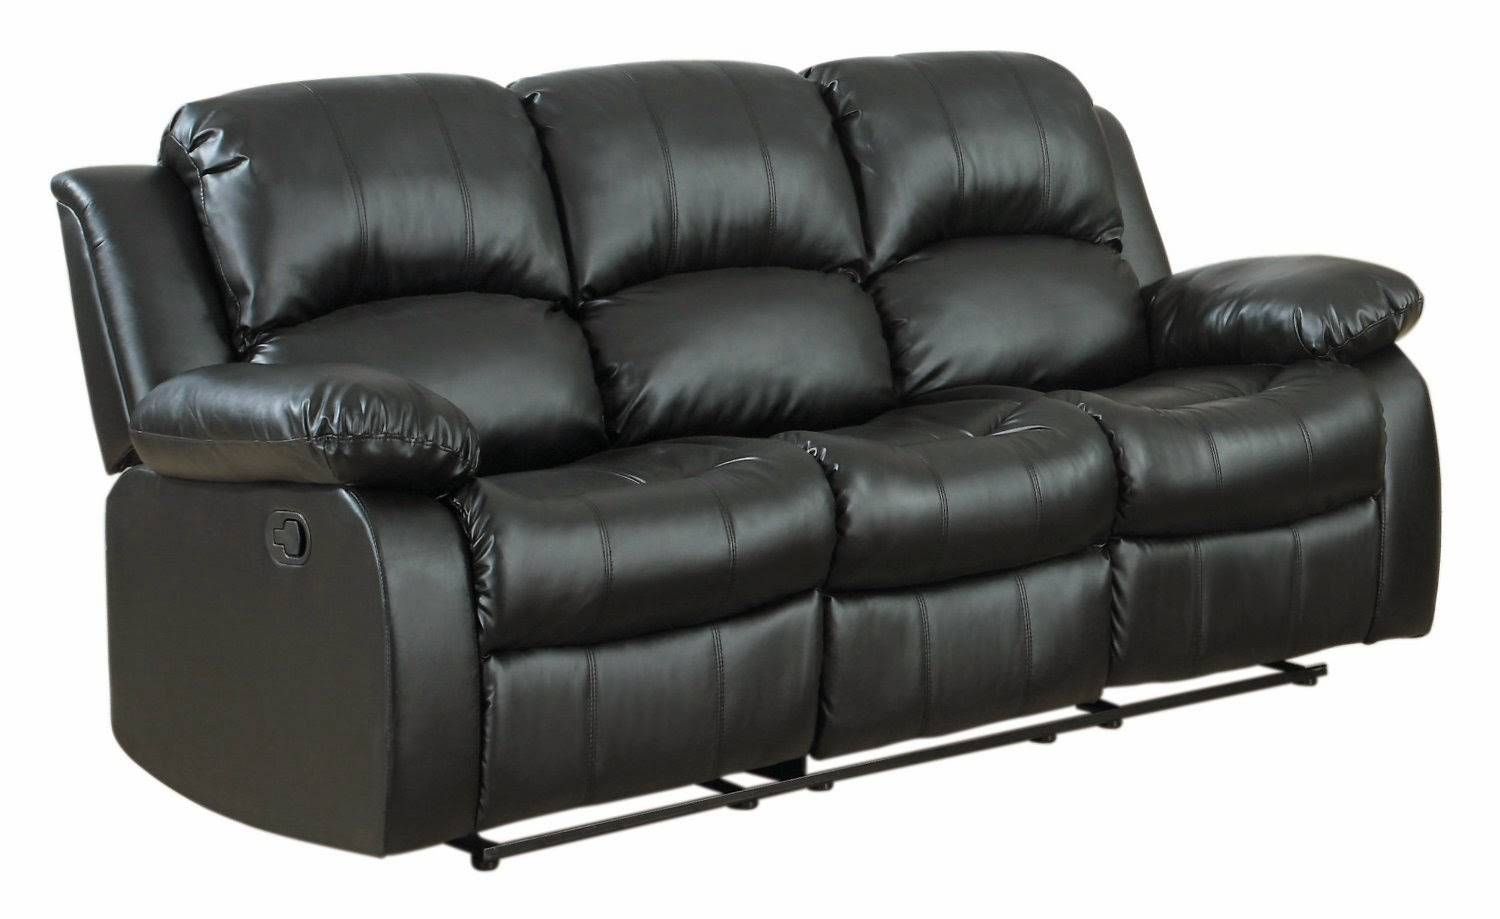 Reclining Sofas For Sale: Berkline Leather Reclining Sofa Costco Throughout Berkline Leather Sofas (View 12 of 15)